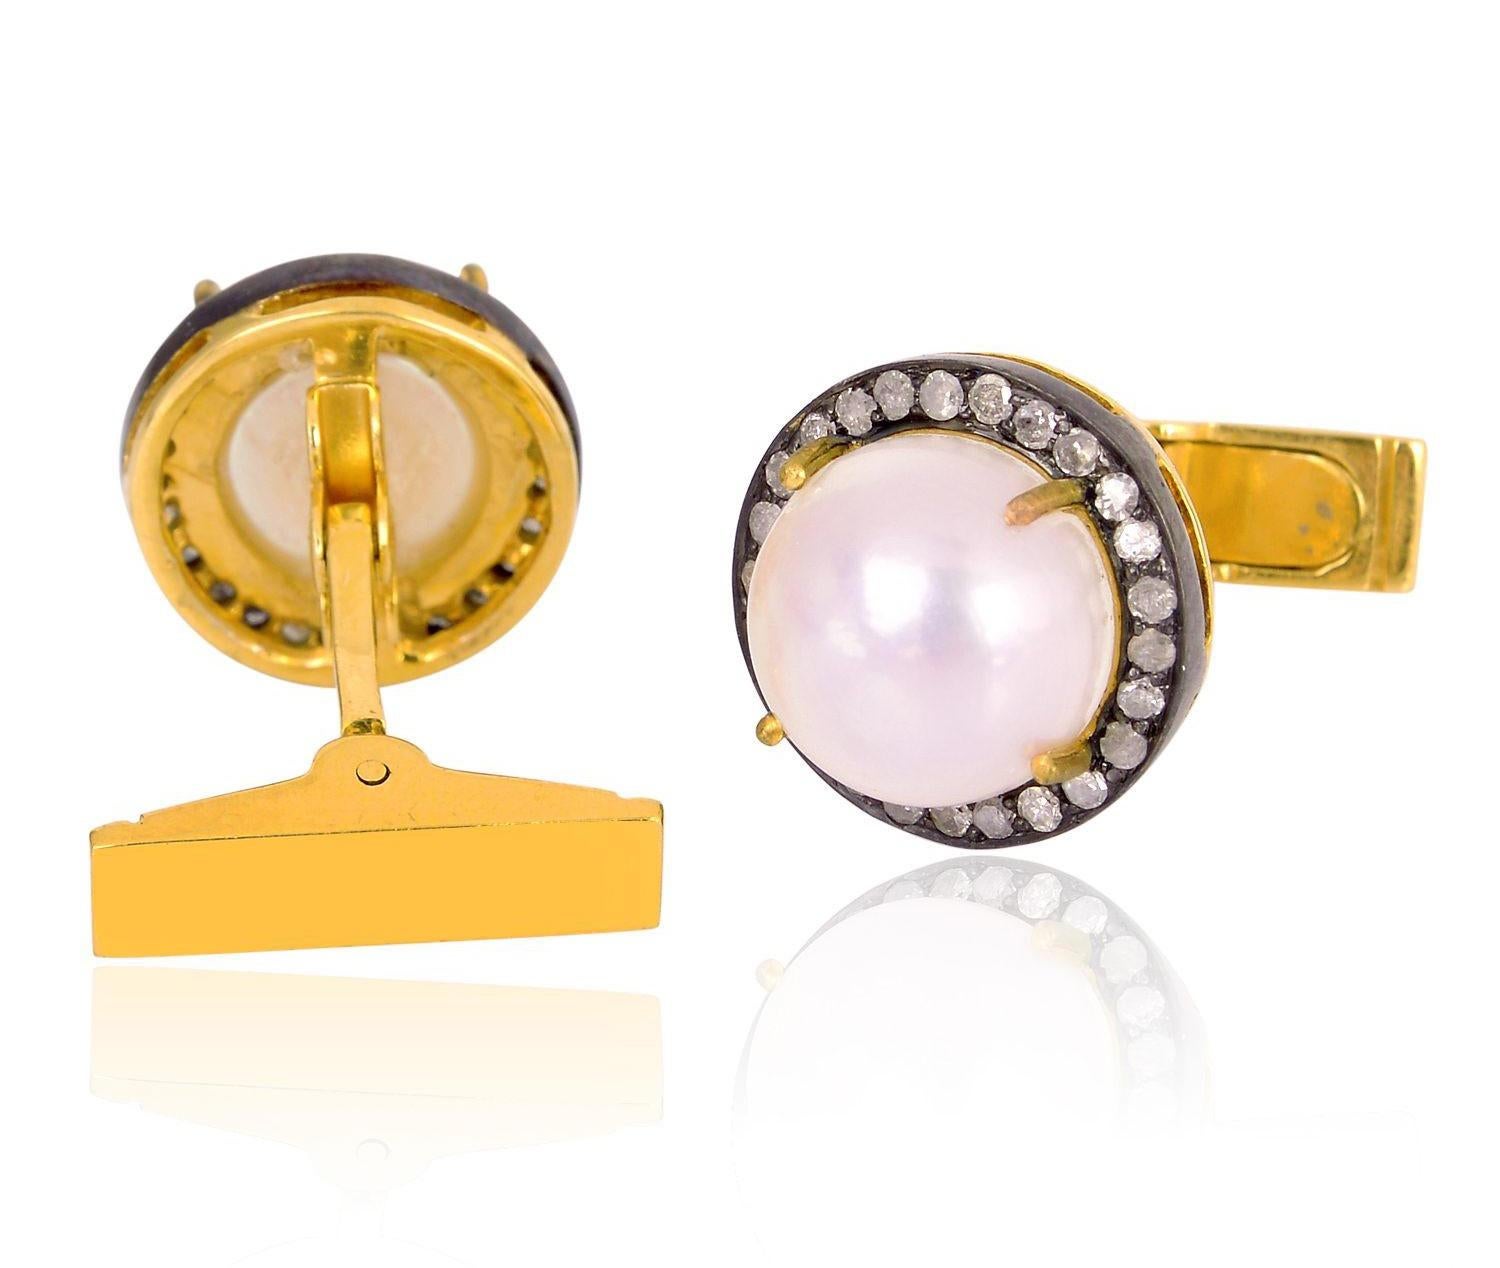 Cast from 18-karat gold and sterling silver, these cuff links are hand set with 1.3 carats pearl and .6 carats of pave diamonds in blackened finish.

FOLLOW  MEGHNA JEWELS storefront to view the latest collection & exclusive pieces.  Meghna Jewels